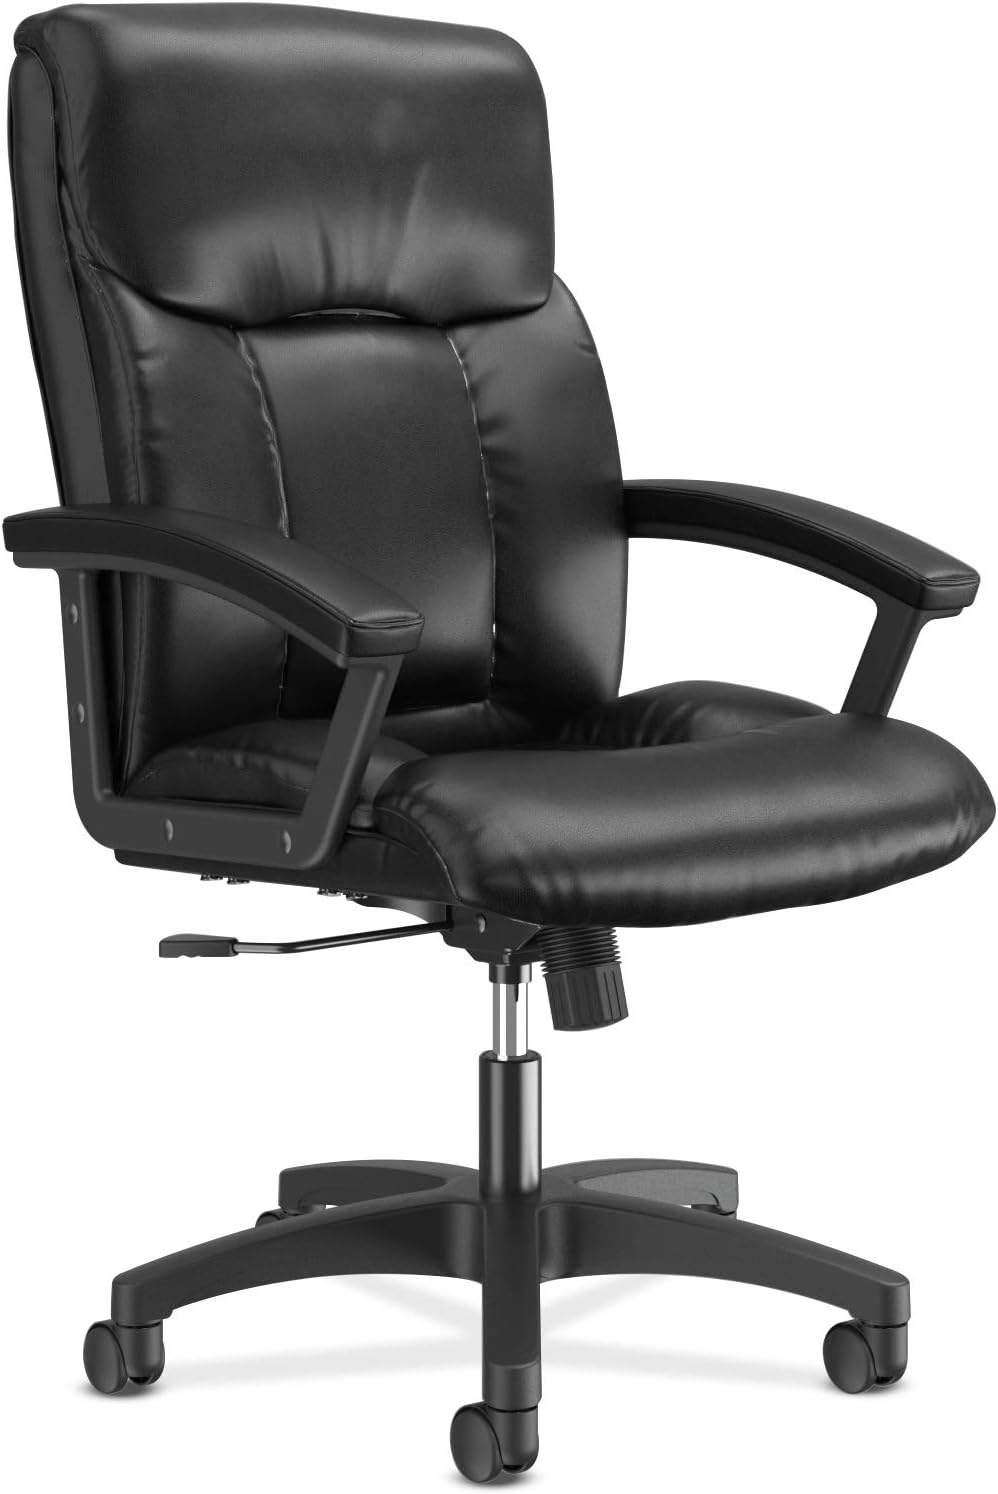 HON Leather Executive Chair - High-Back Computer Chair for Office Desk, Black (VL151)